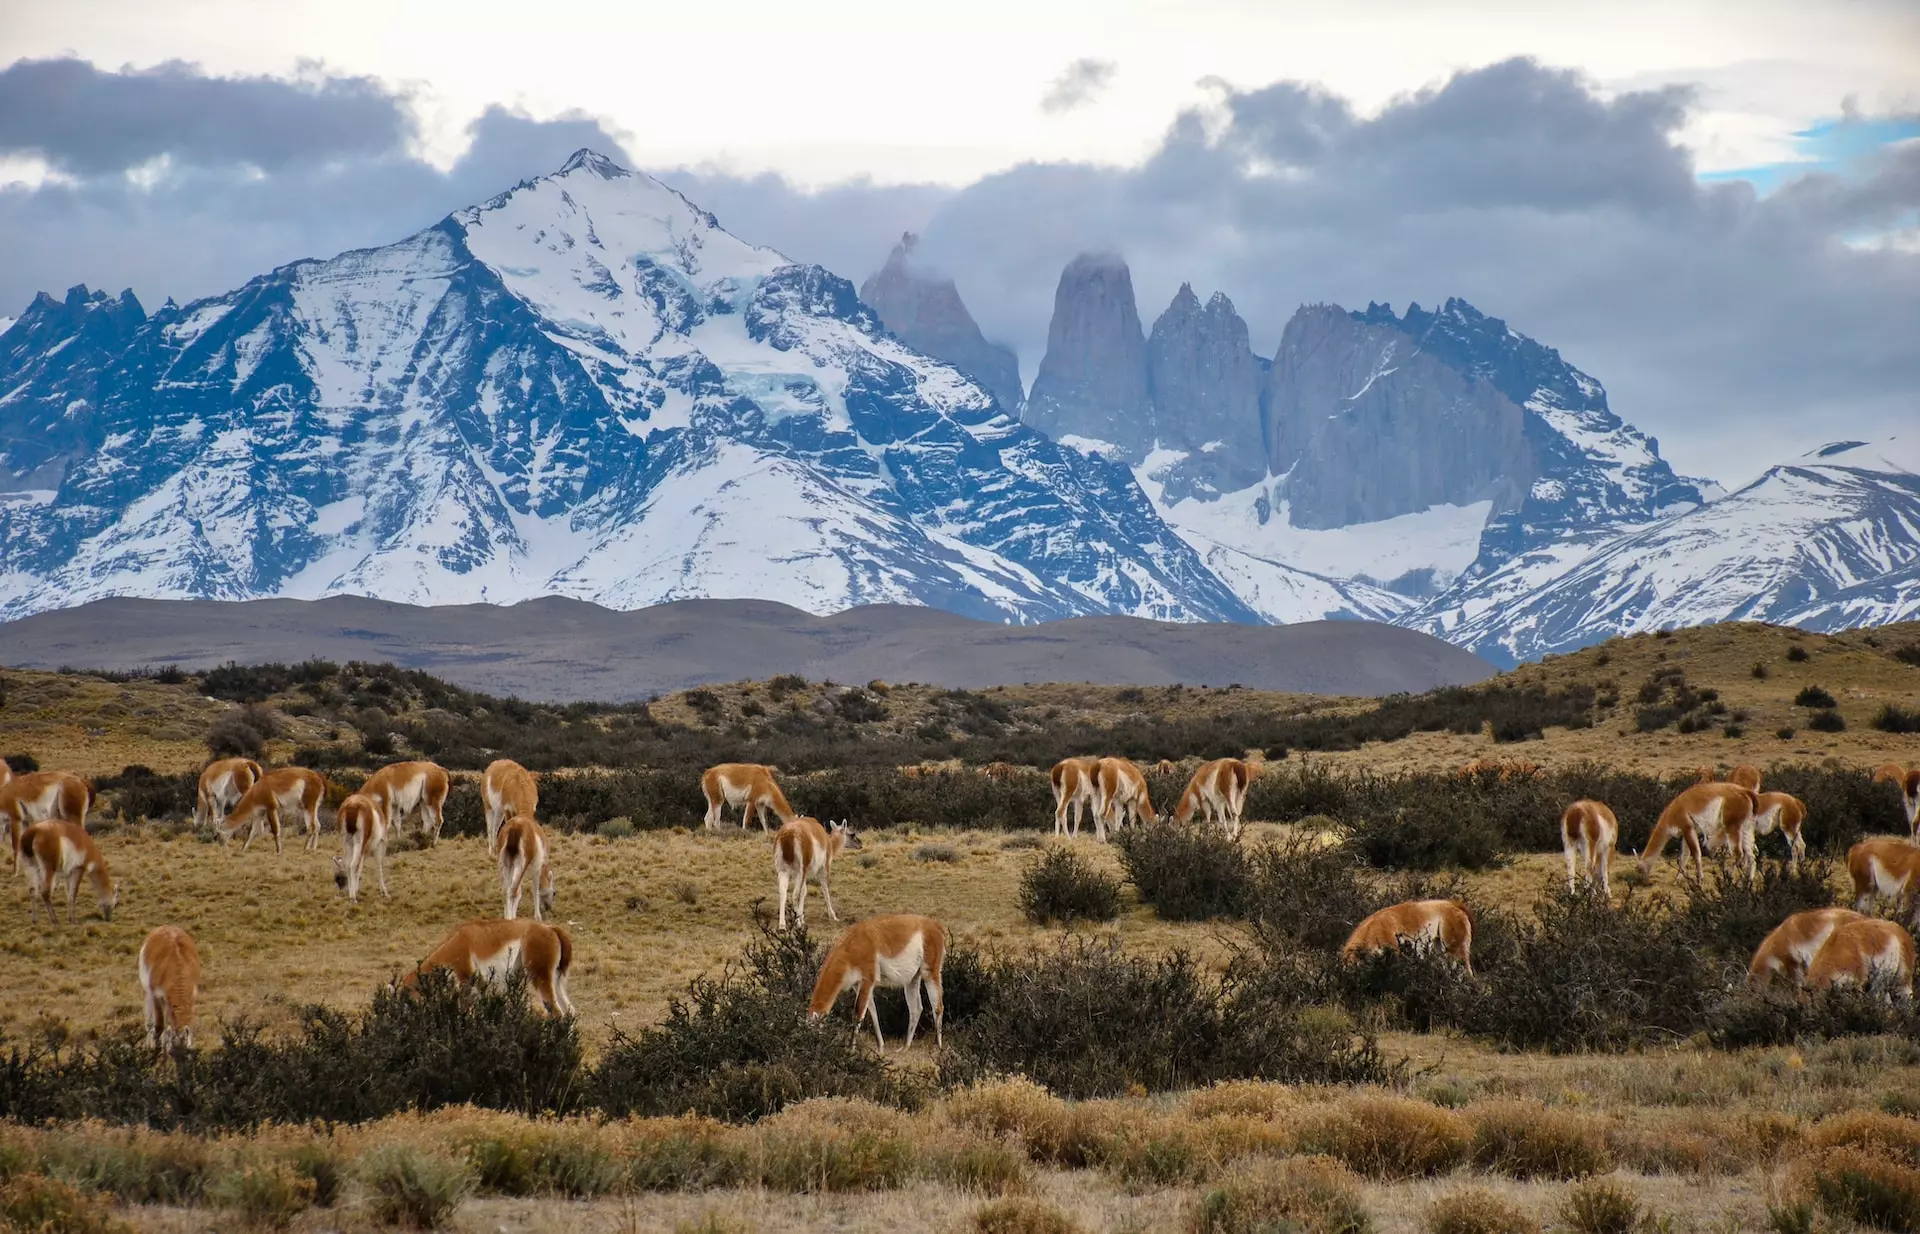 The unforgettable W Trek experience at Torres Del Paine (Patagonia)